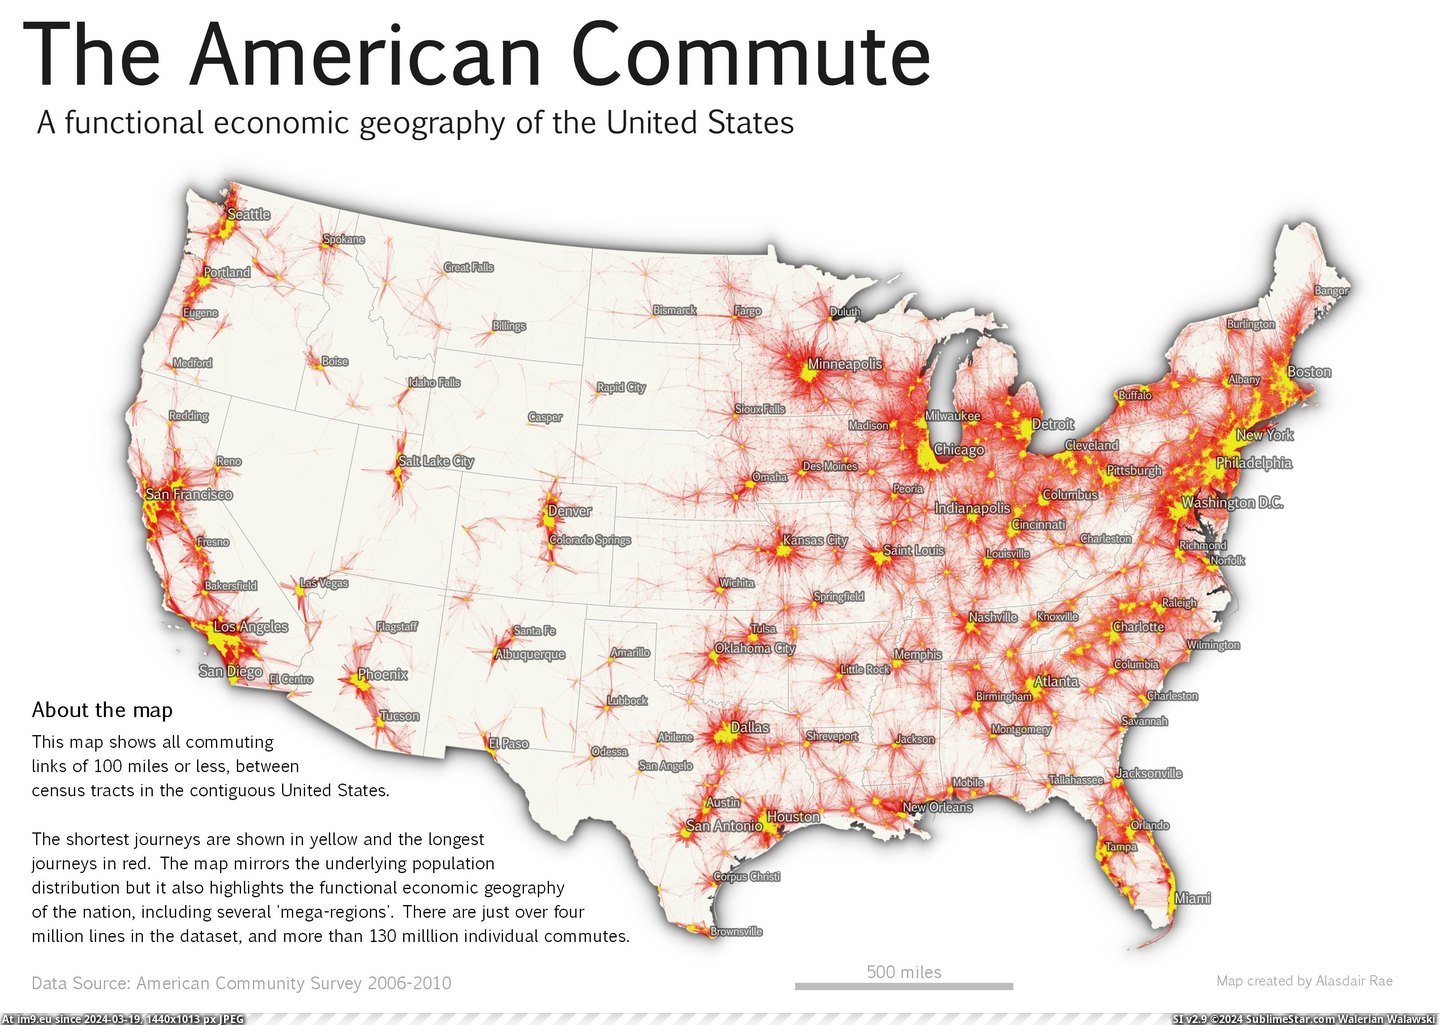 #Map #American #Usa #Commute #Links #Miles #Rae #Contiguous [Mapporn] The American Commute: map of all commuting links of 100 miles or less in the contiguous USA. (by Alasdair Rae)[3507x24 Pic. (Image of album My r/MAPS favs))